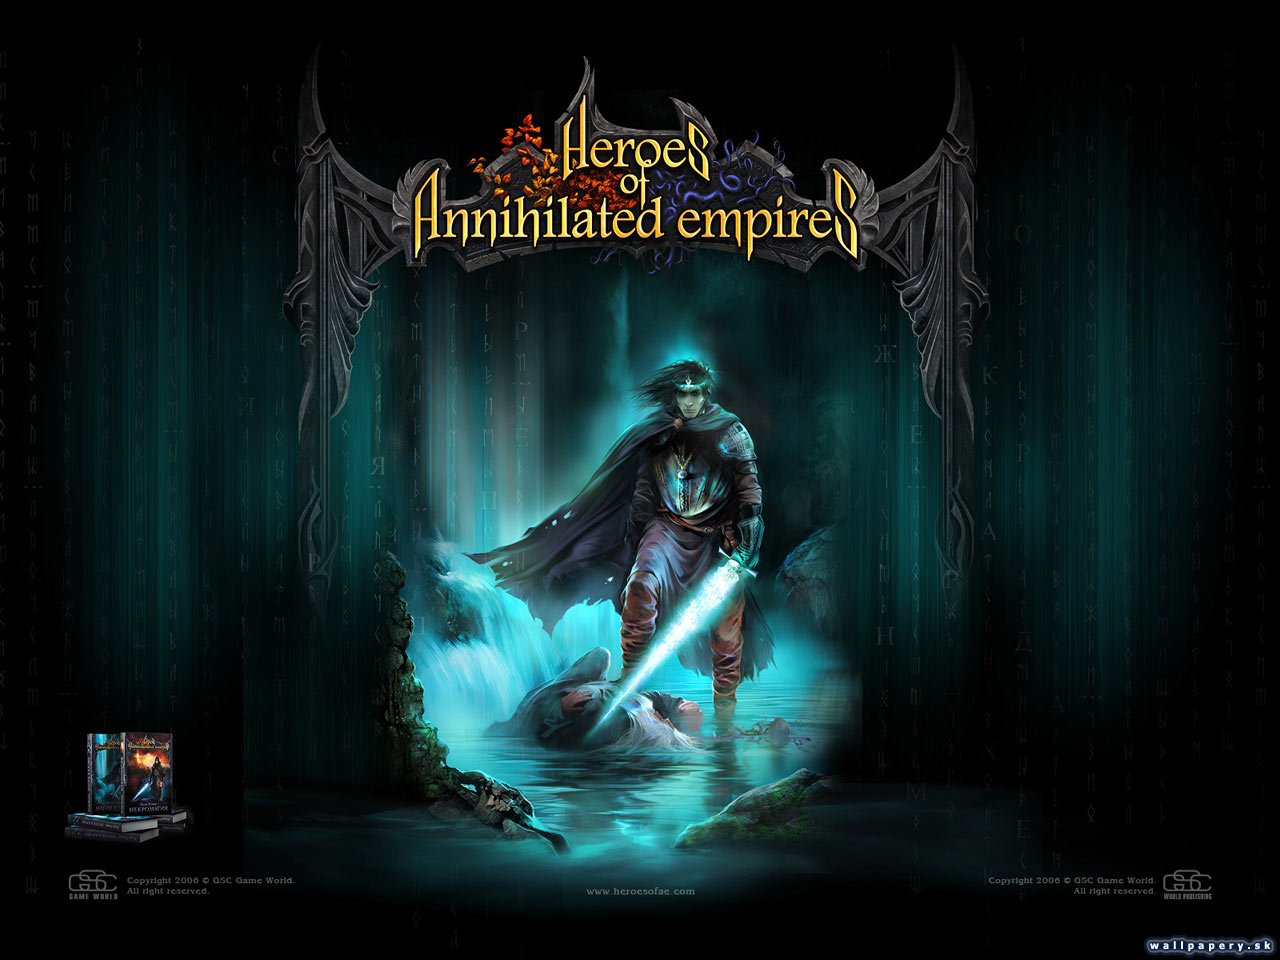 Heroes of Annihilated Empires - wallpaper 7